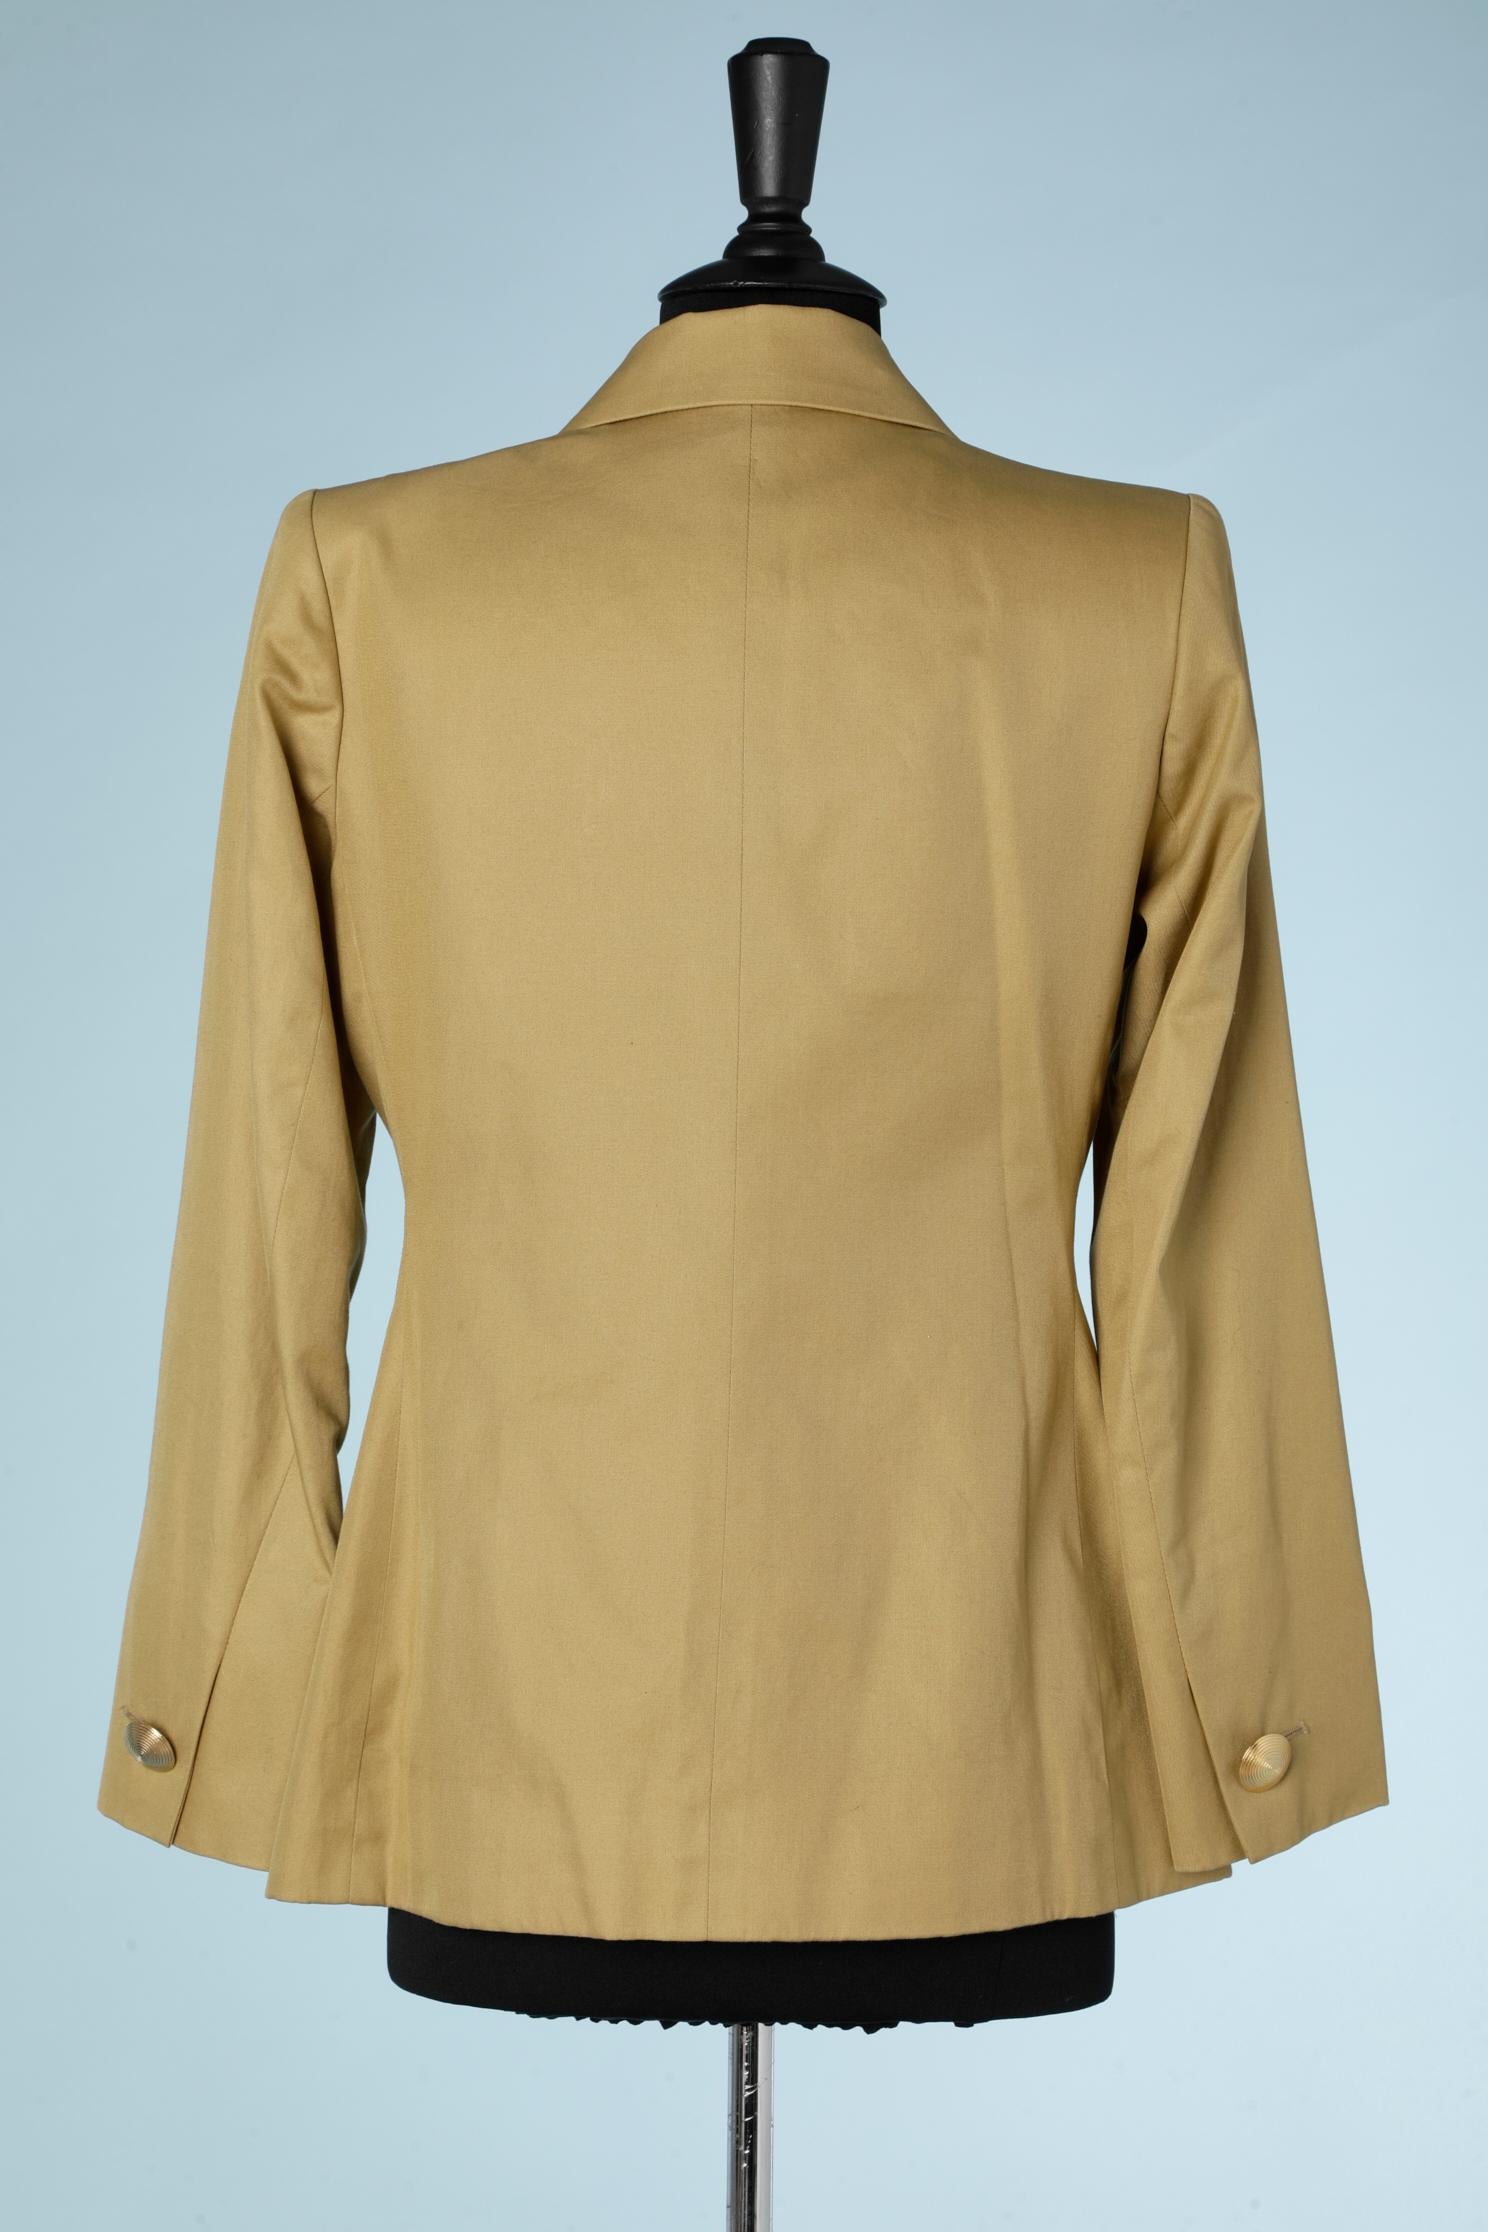 Women's Mustard green cotton  jacket with gold metal buttons YSL Rive Gauche  For Sale